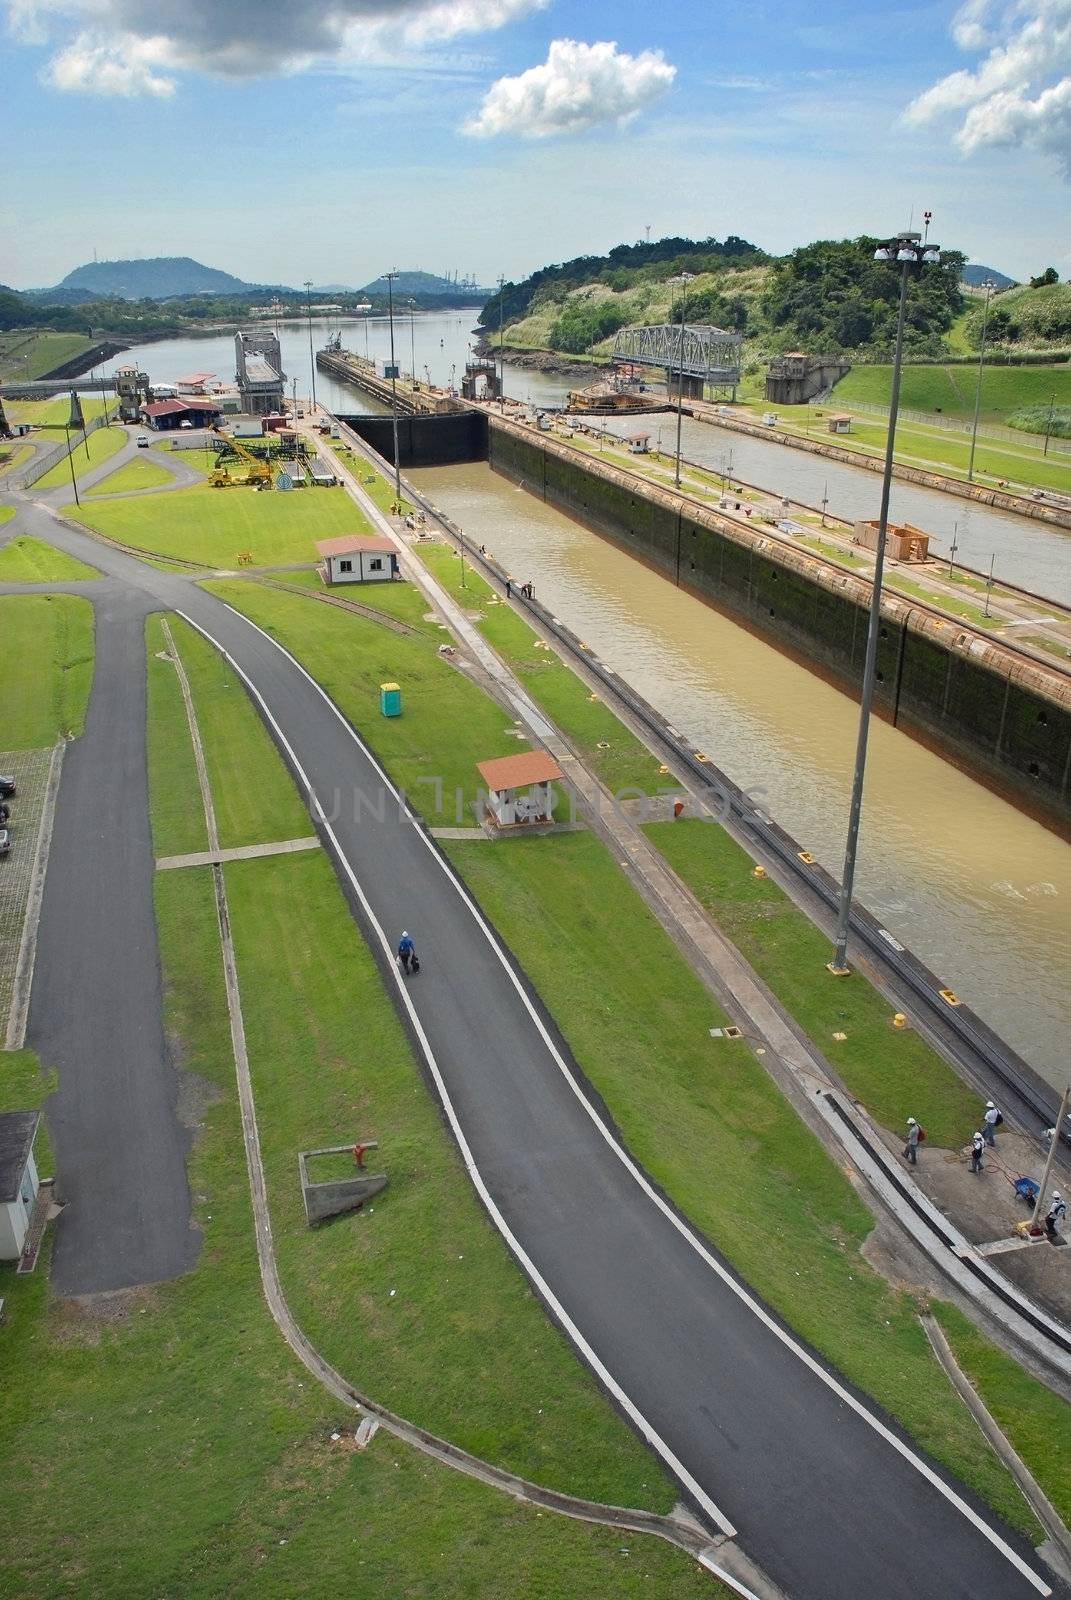 PANAMA-SEPTEMBER 10. Miraflores locks activity on September 10, 2006 in Panama Canal. Located at the narrowest point between the Atlantic and Pacific oceans, Panama Canal has had a far-reaching effect on world economic development